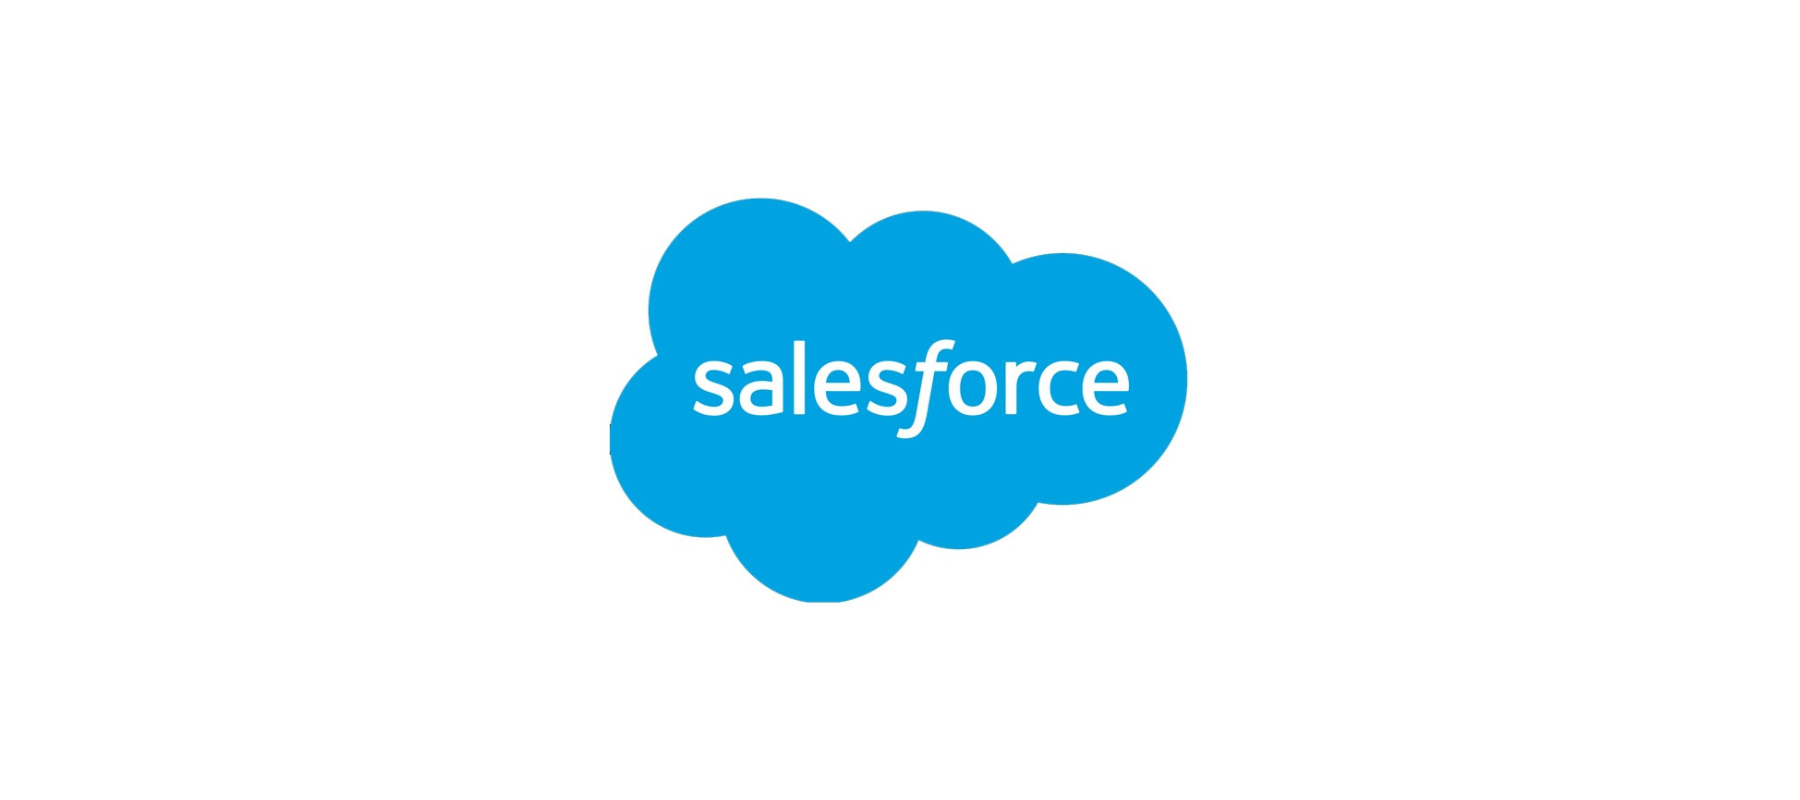 New Salesforce-WhatsApp integration brings marketing and service conversations together